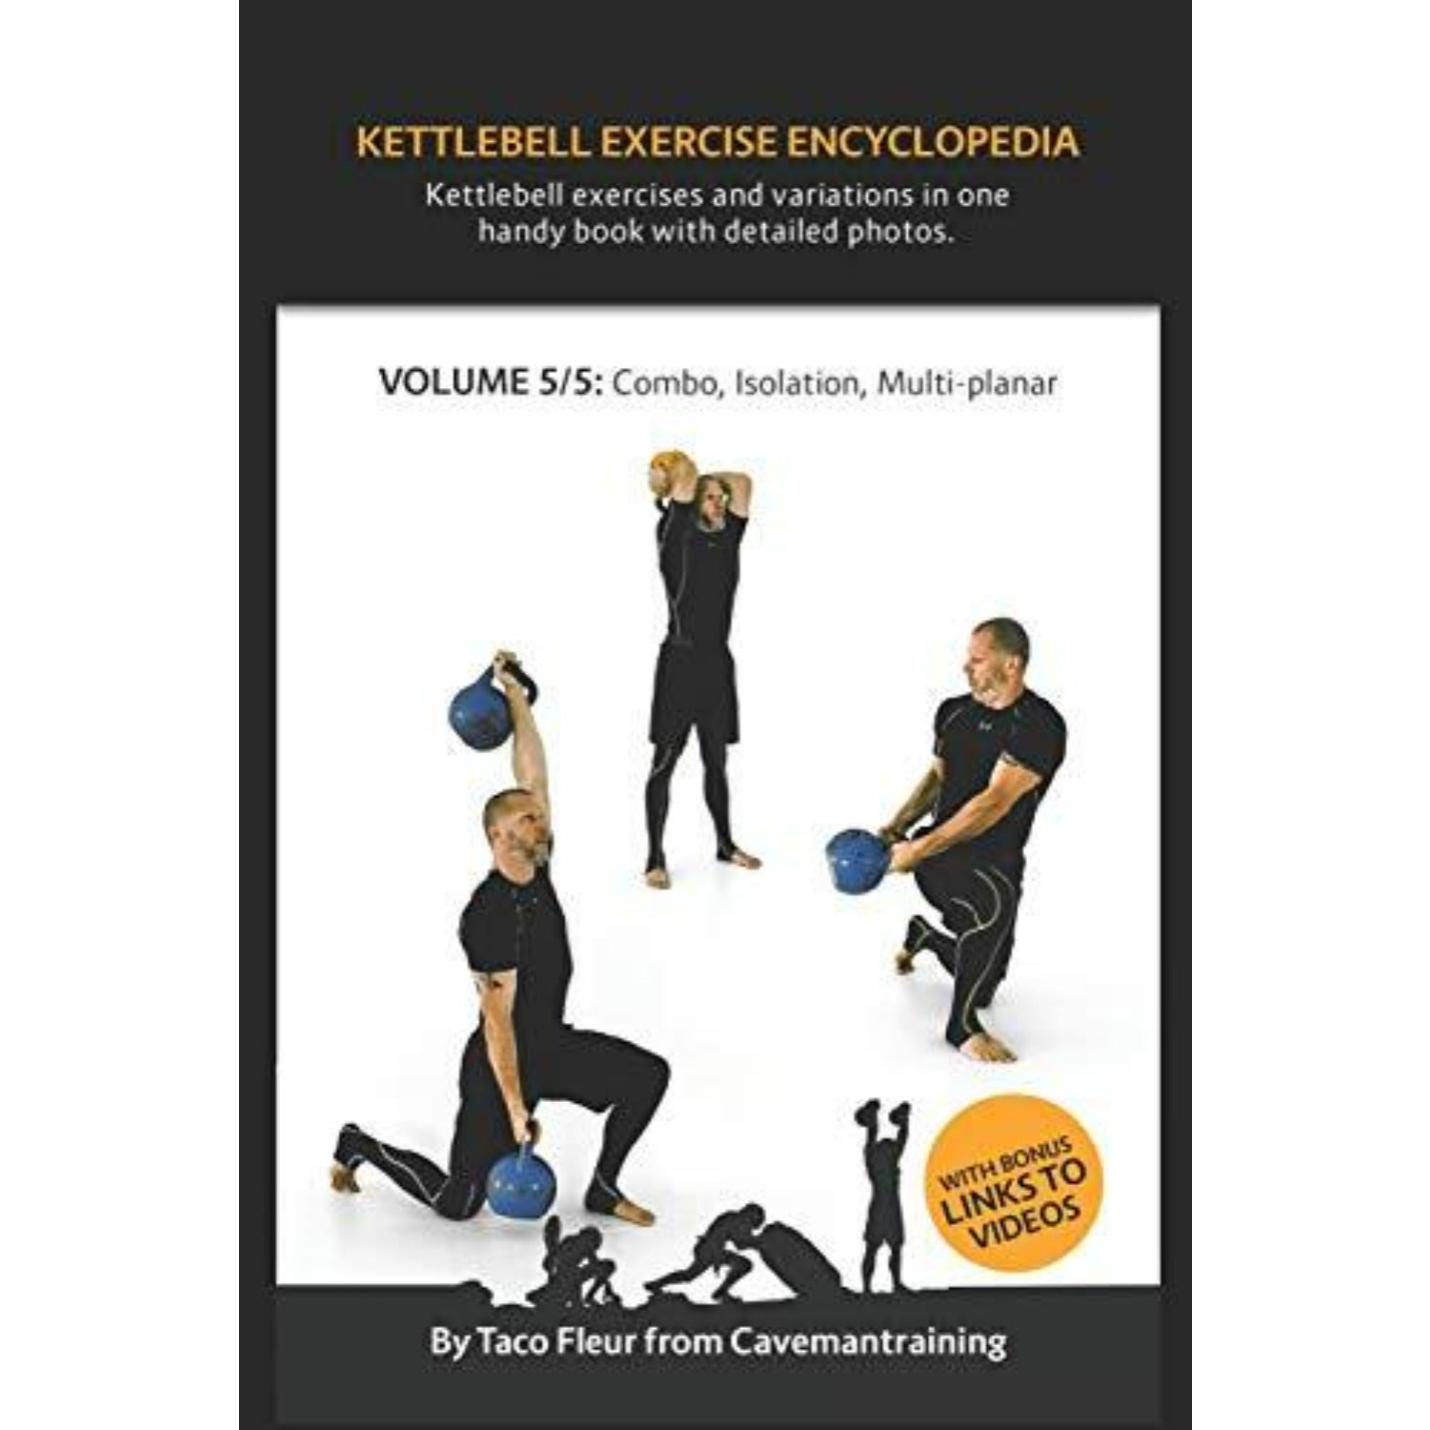 Kettlebell Exercise Encyclopedia VOL. 5: Kettlebell combos, isolation, and multi-planar exercise variations - kettlebell oefeningen - happygetfit.com